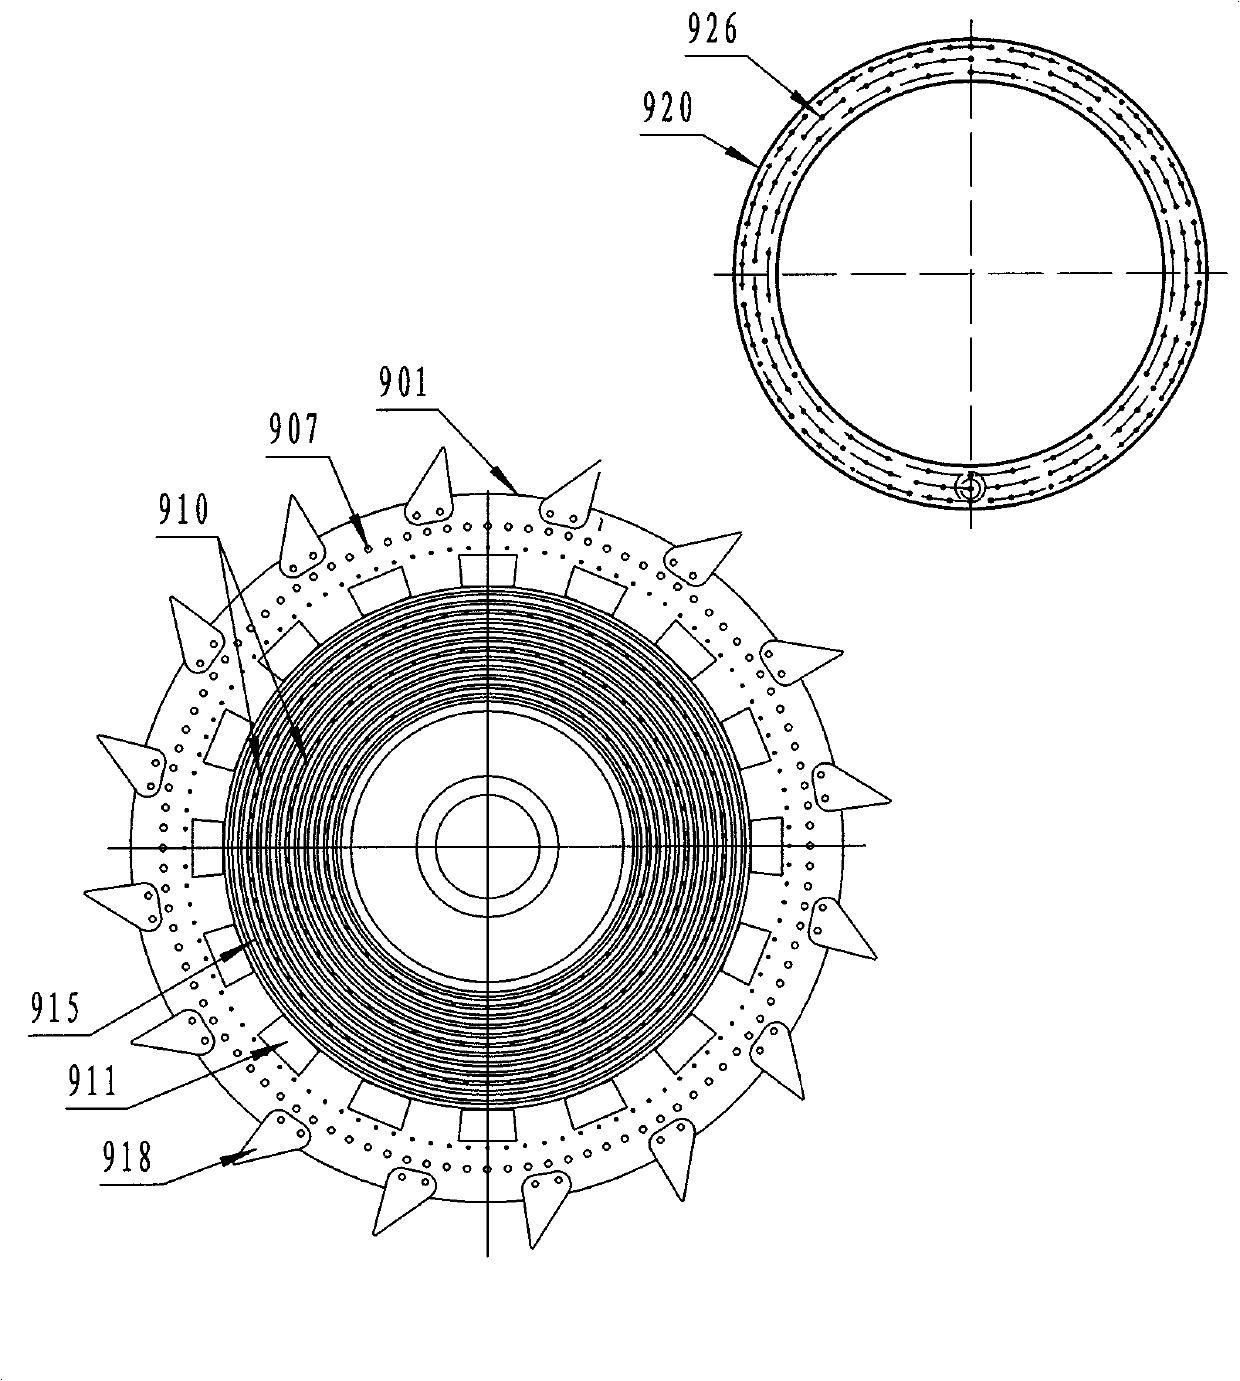 Permanent magnetic speed regulation, brake or load apparatus capable of stepless adjustment of magnetic field intensity